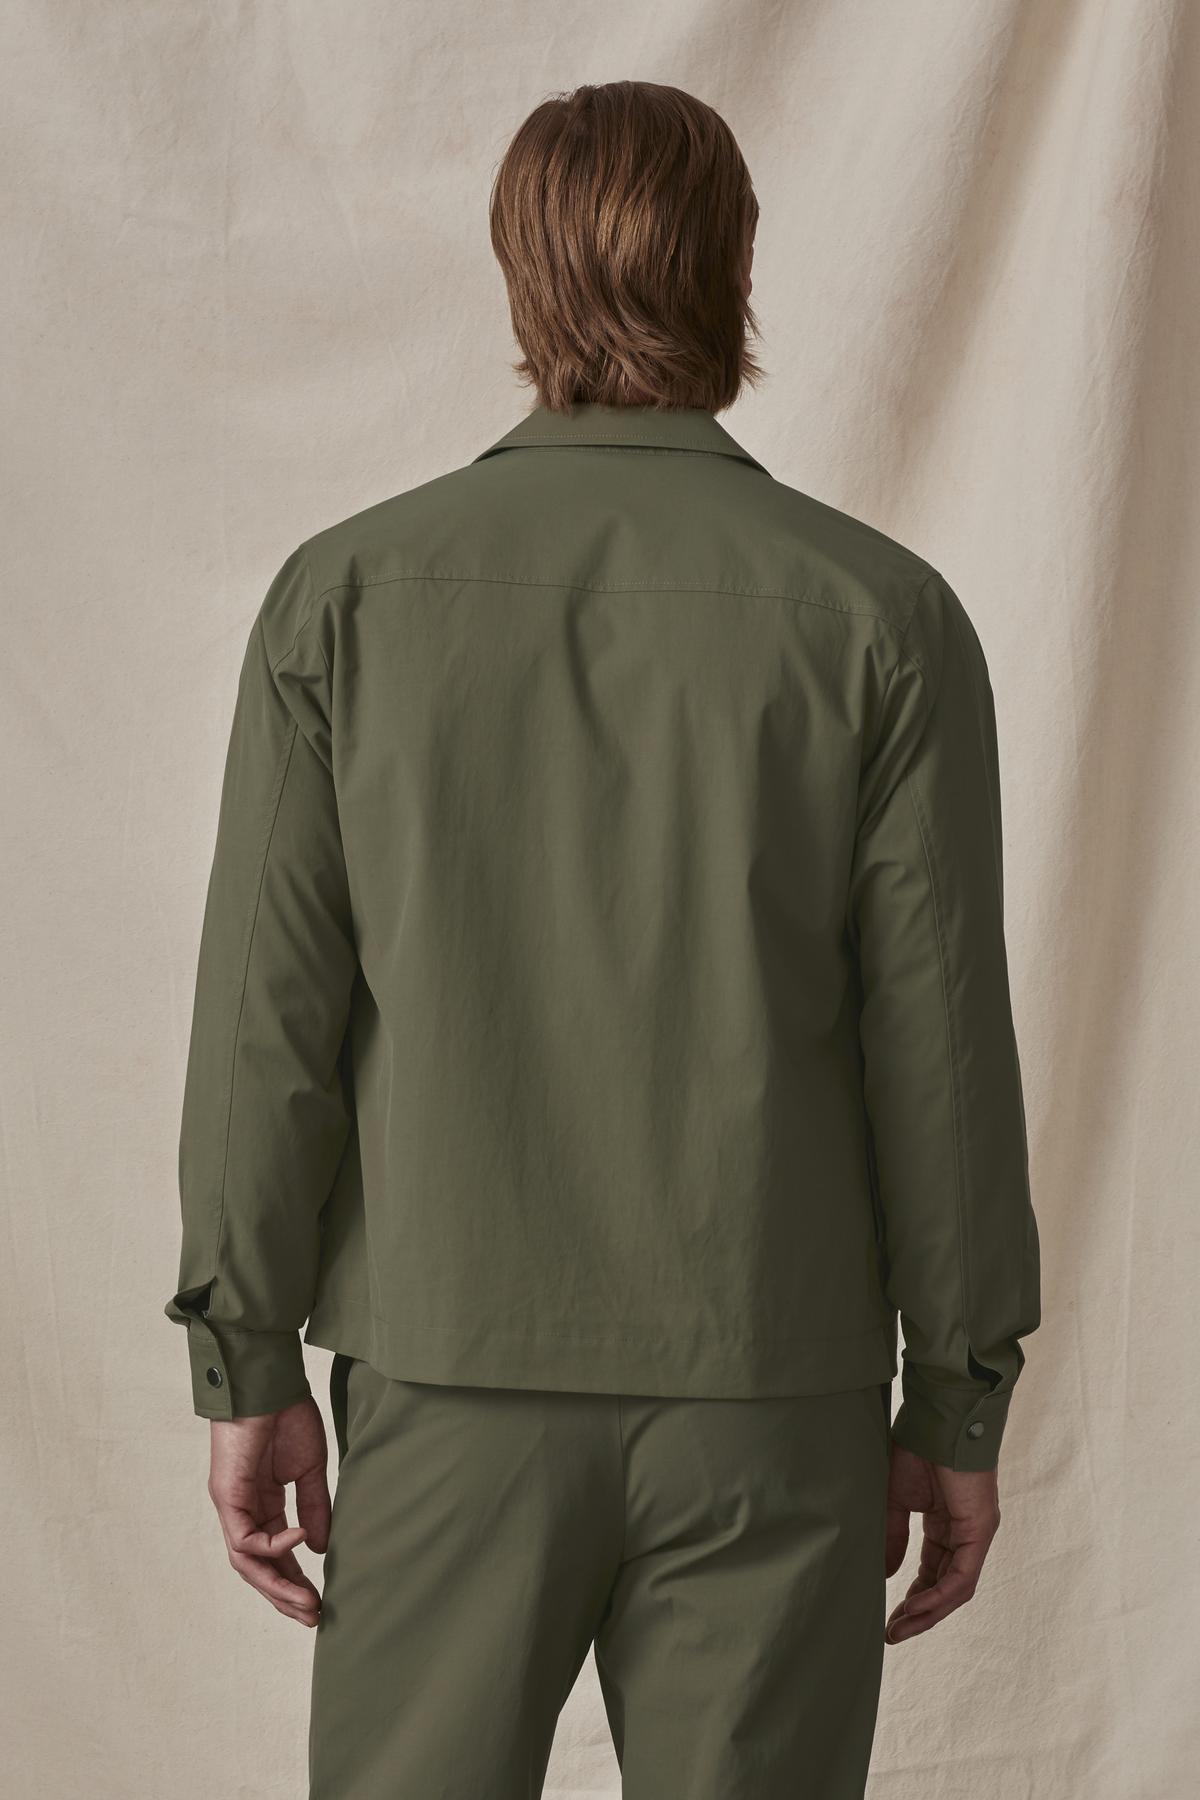   Man wearing a green velvet by Graham & Spencer cotton blend shirt and pants, viewed from behind. 